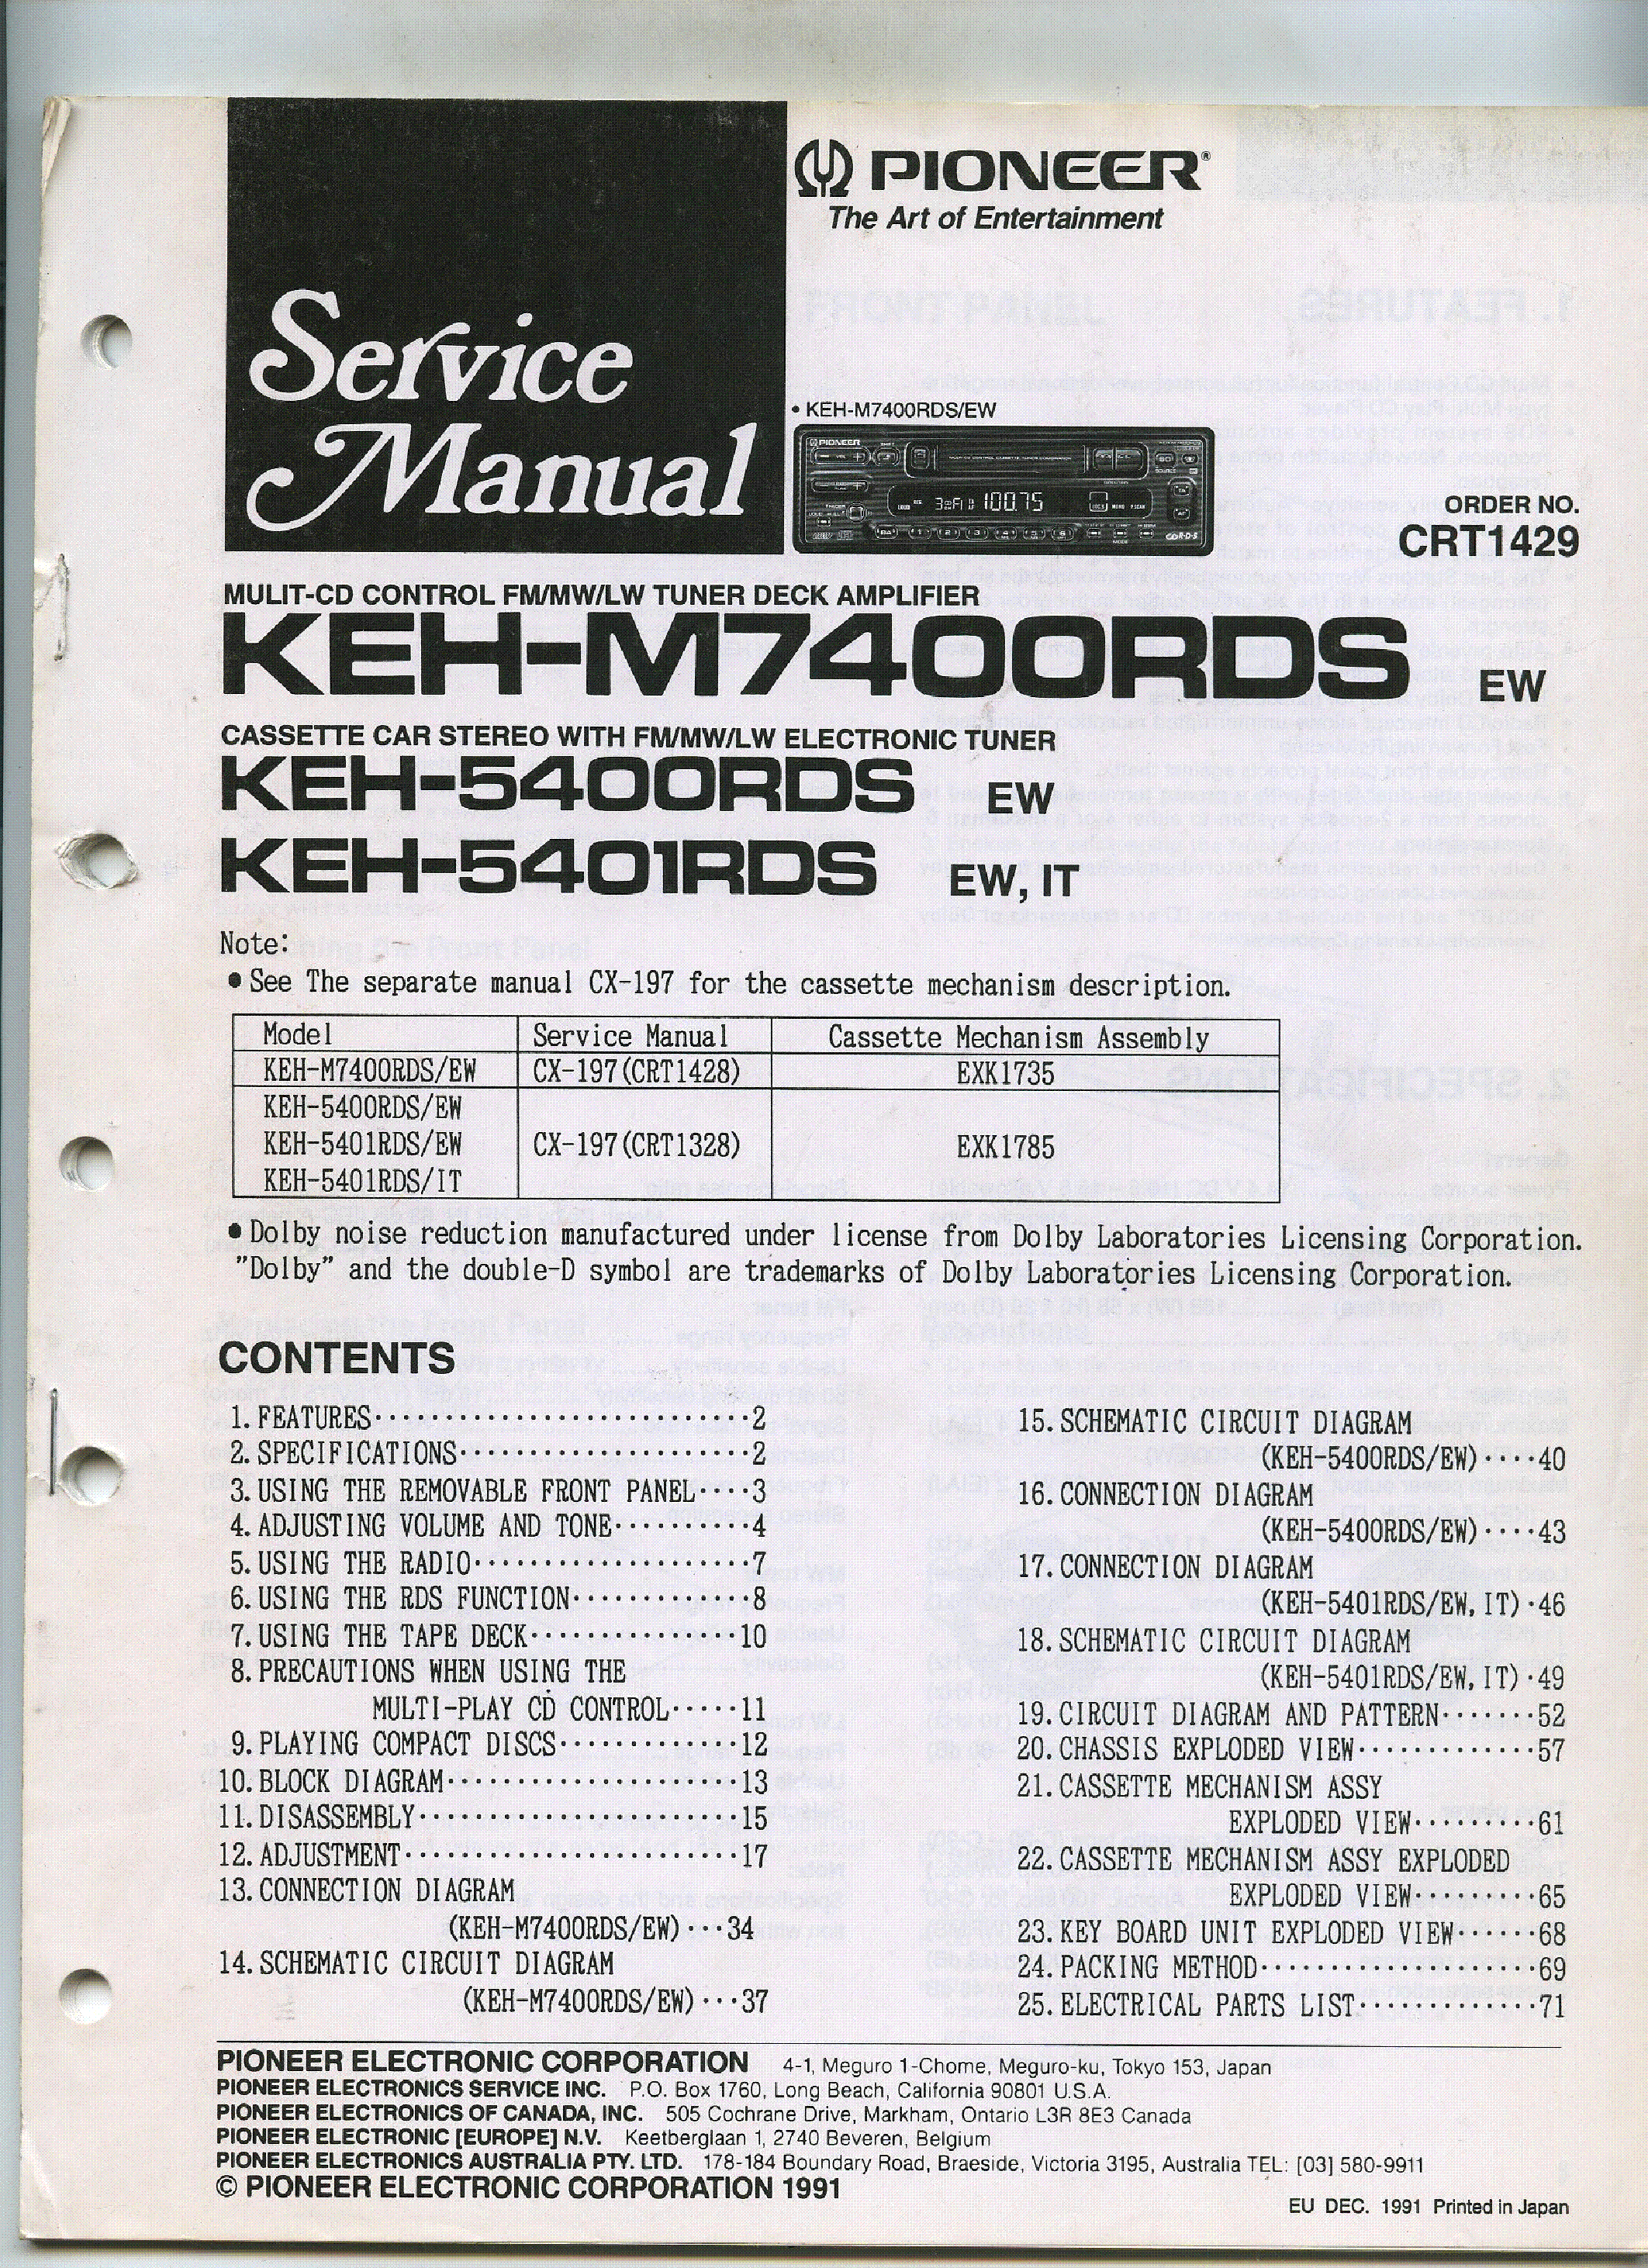 PIONEER KEH-5401RDS service manual (1st page)